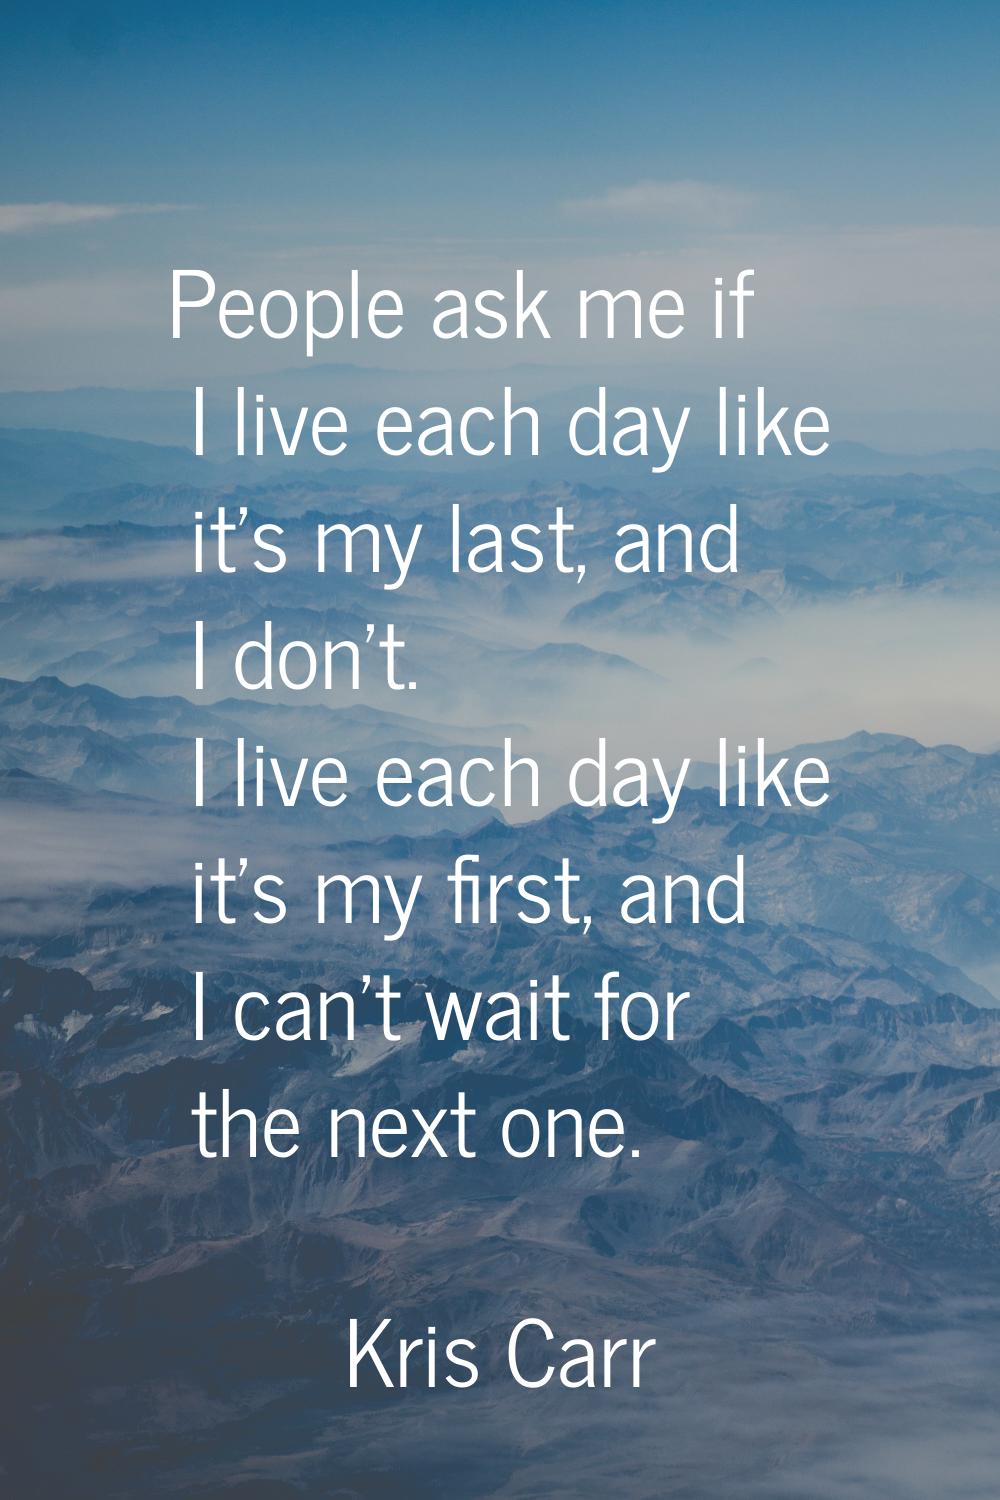 People ask me if I live each day like it's my last, and I don't. I live each day like it's my first